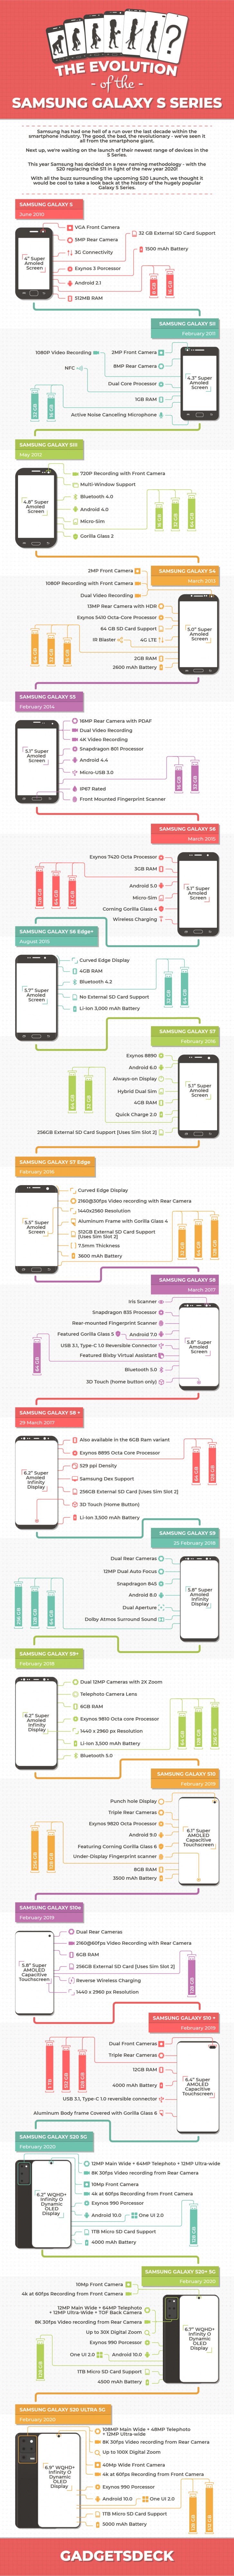 Infographic: 11 generations of Galaxy S flagships